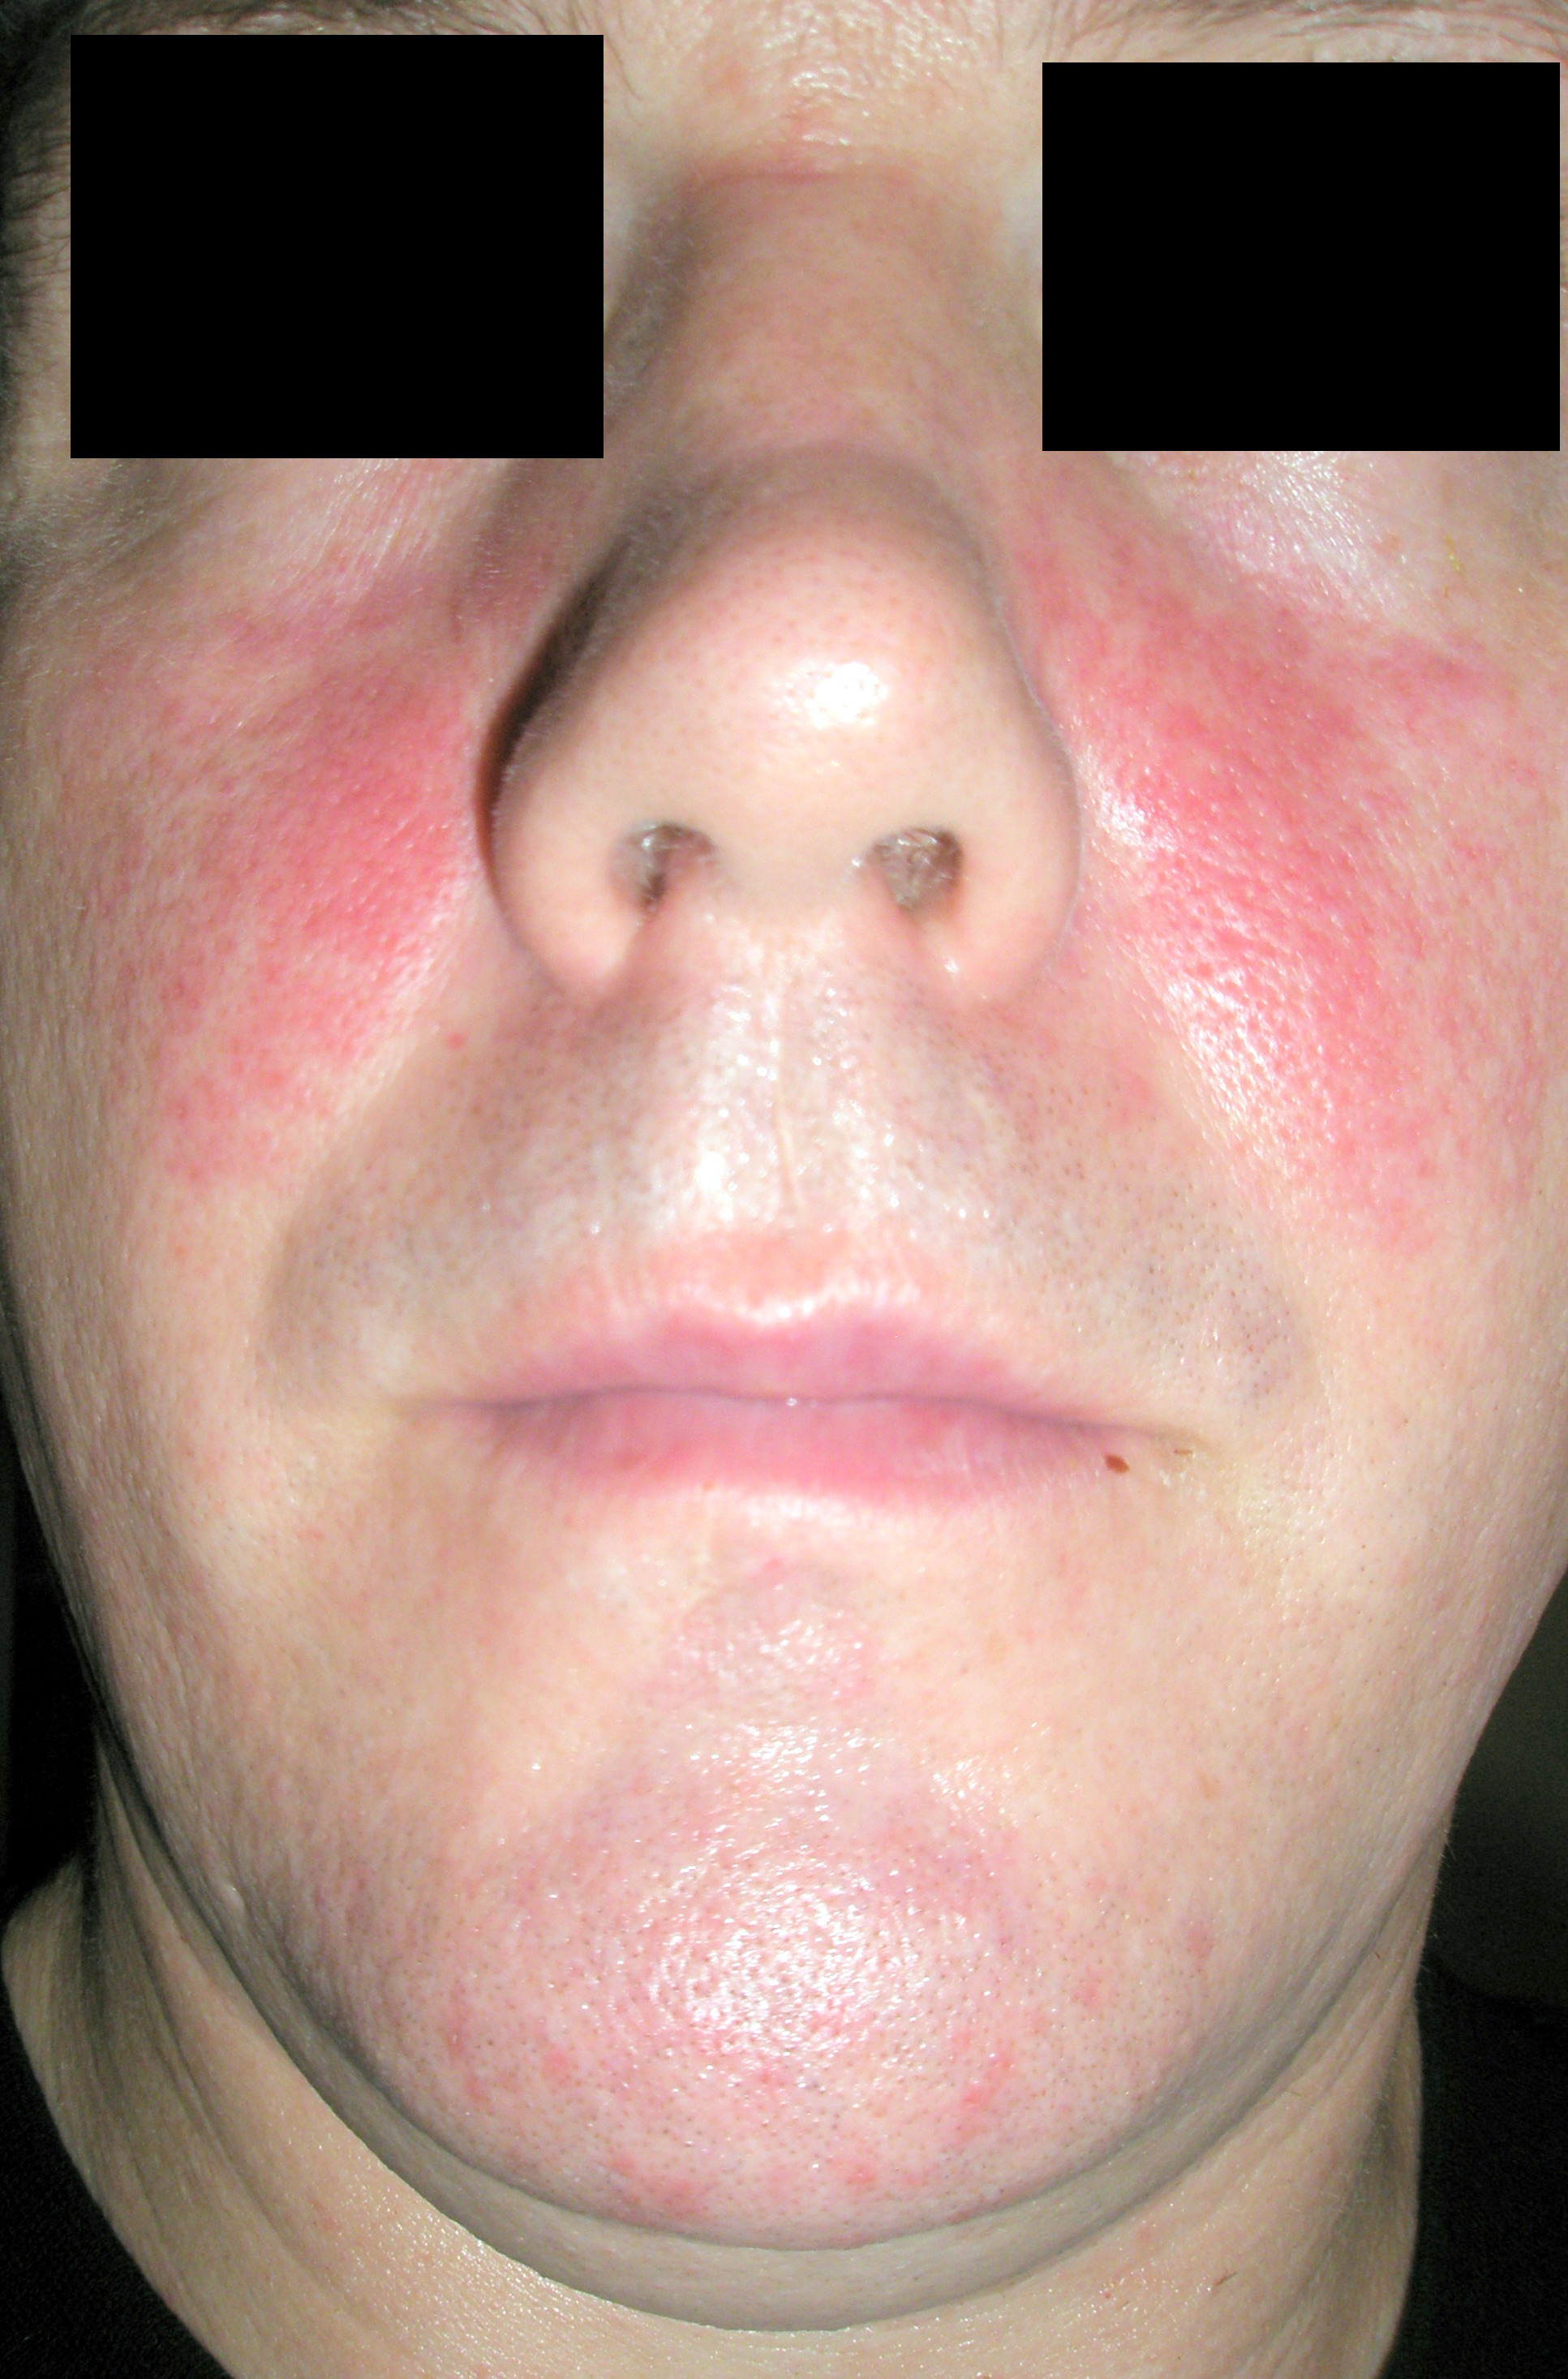 Red cheeks are often caused by rosacea